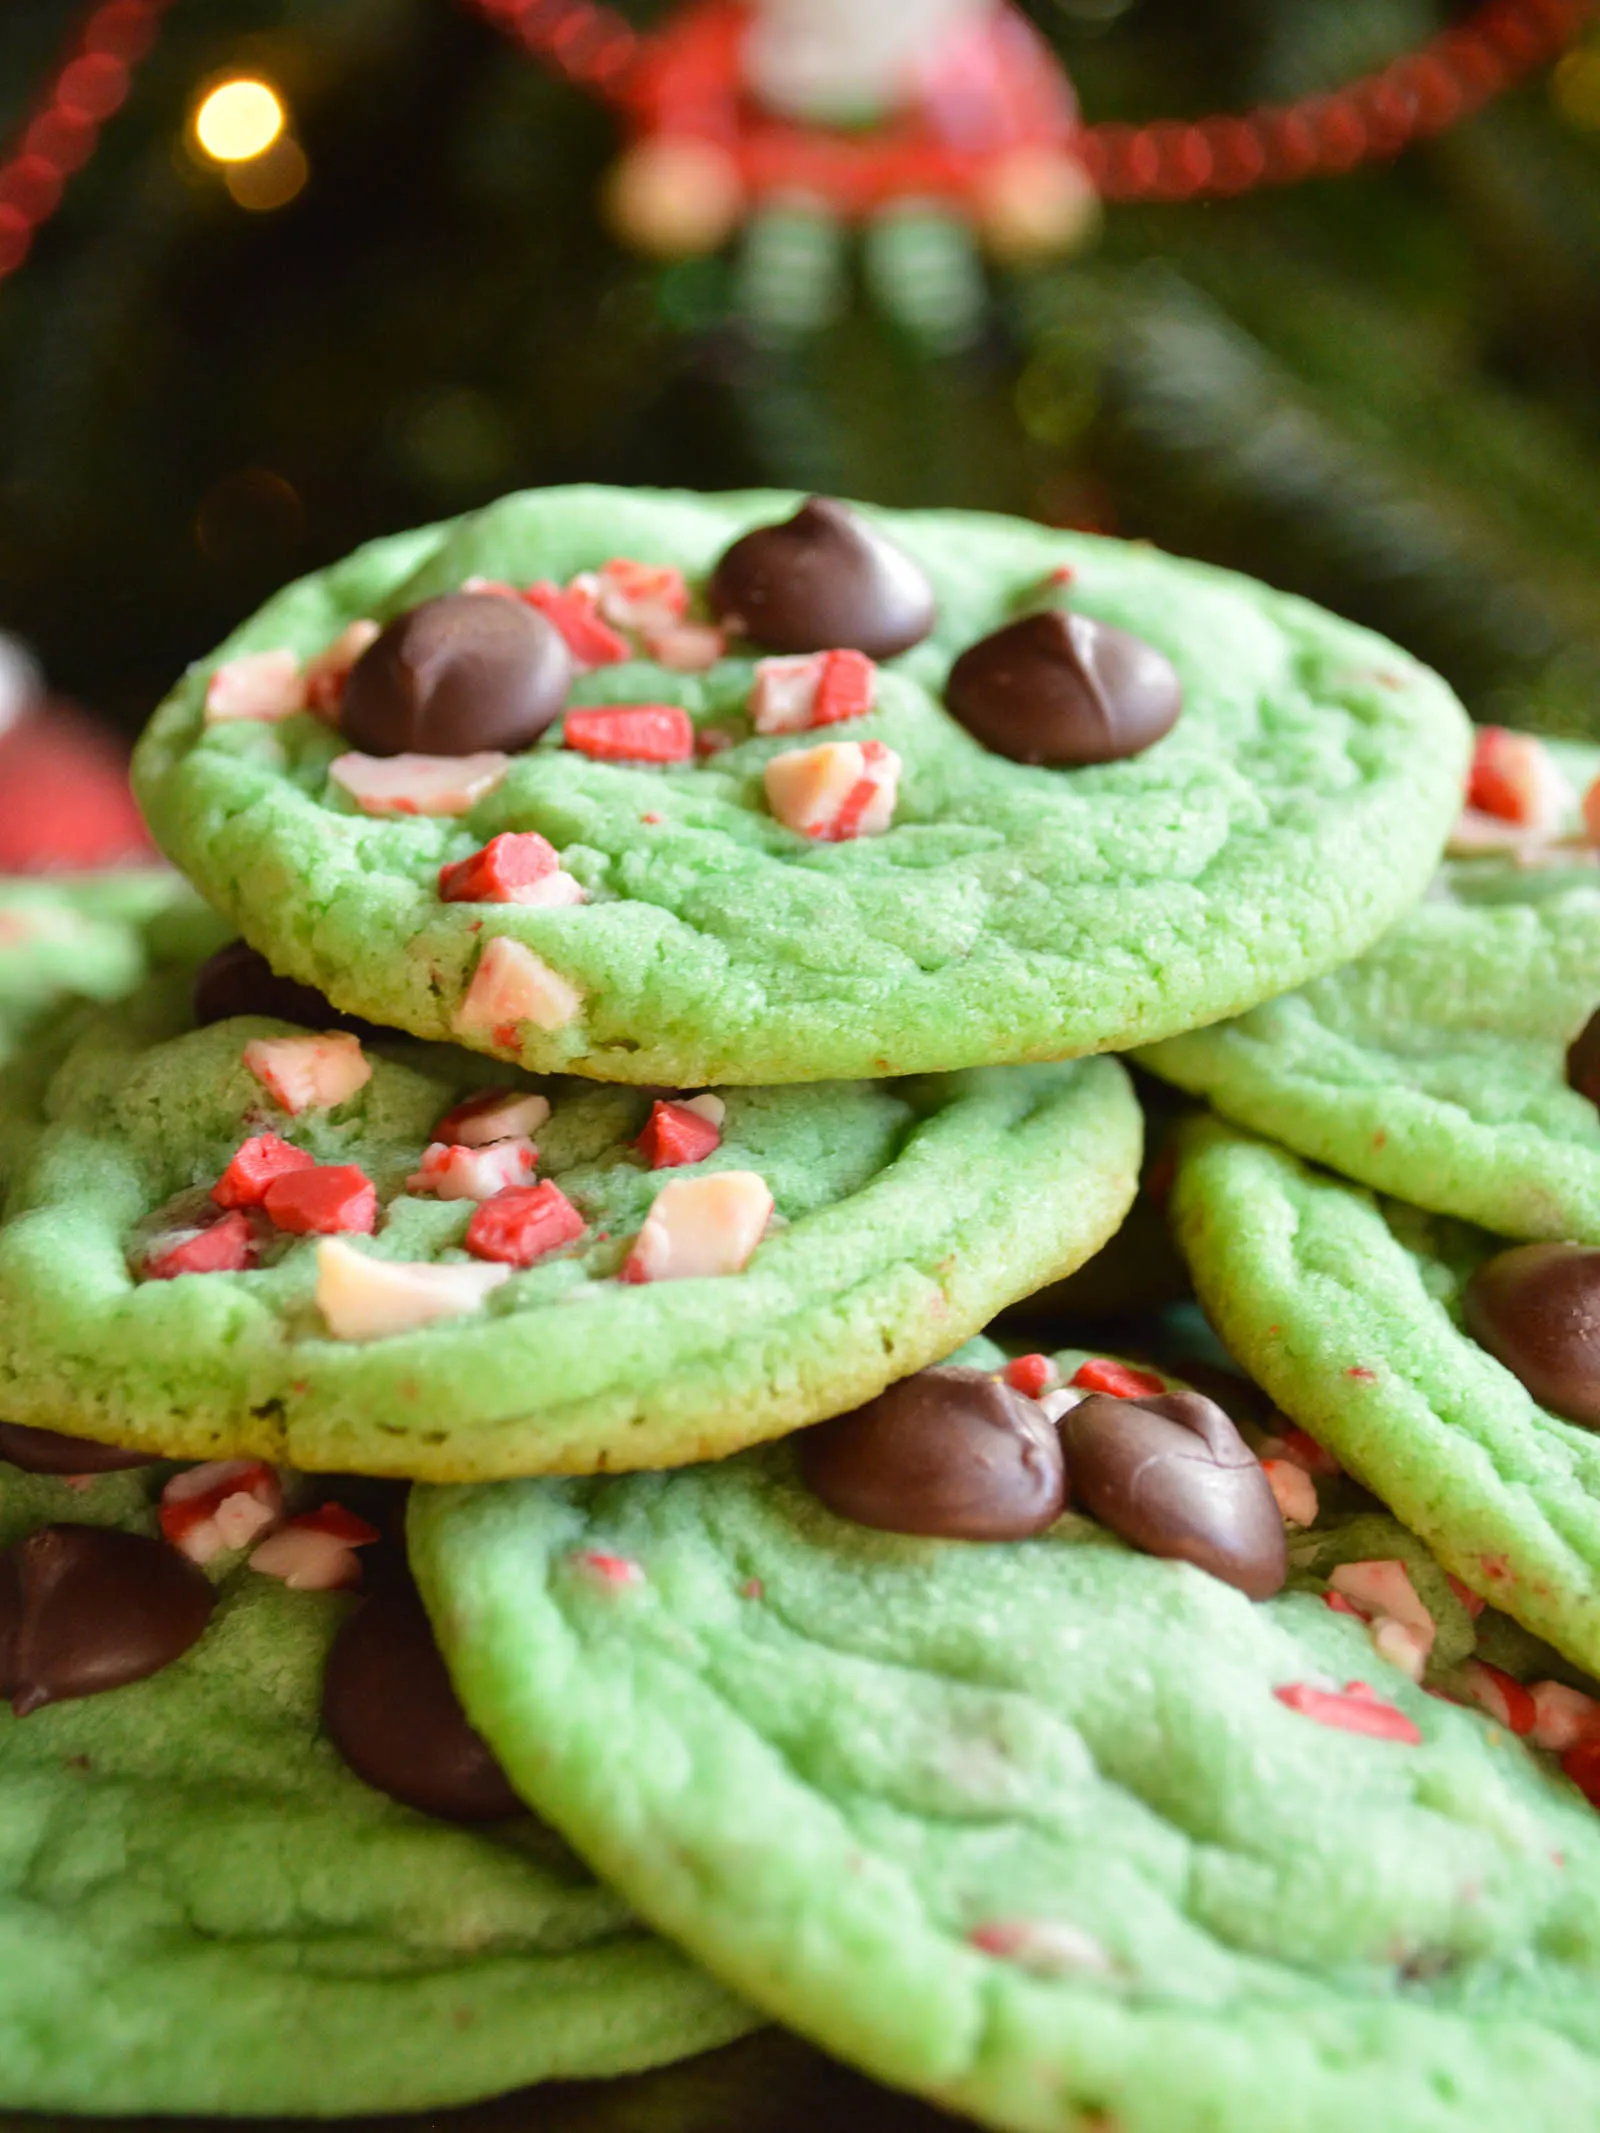 A pile of green chocolate chip "Grinch" cookies studded with chocolate chips aqnd peppermint chips